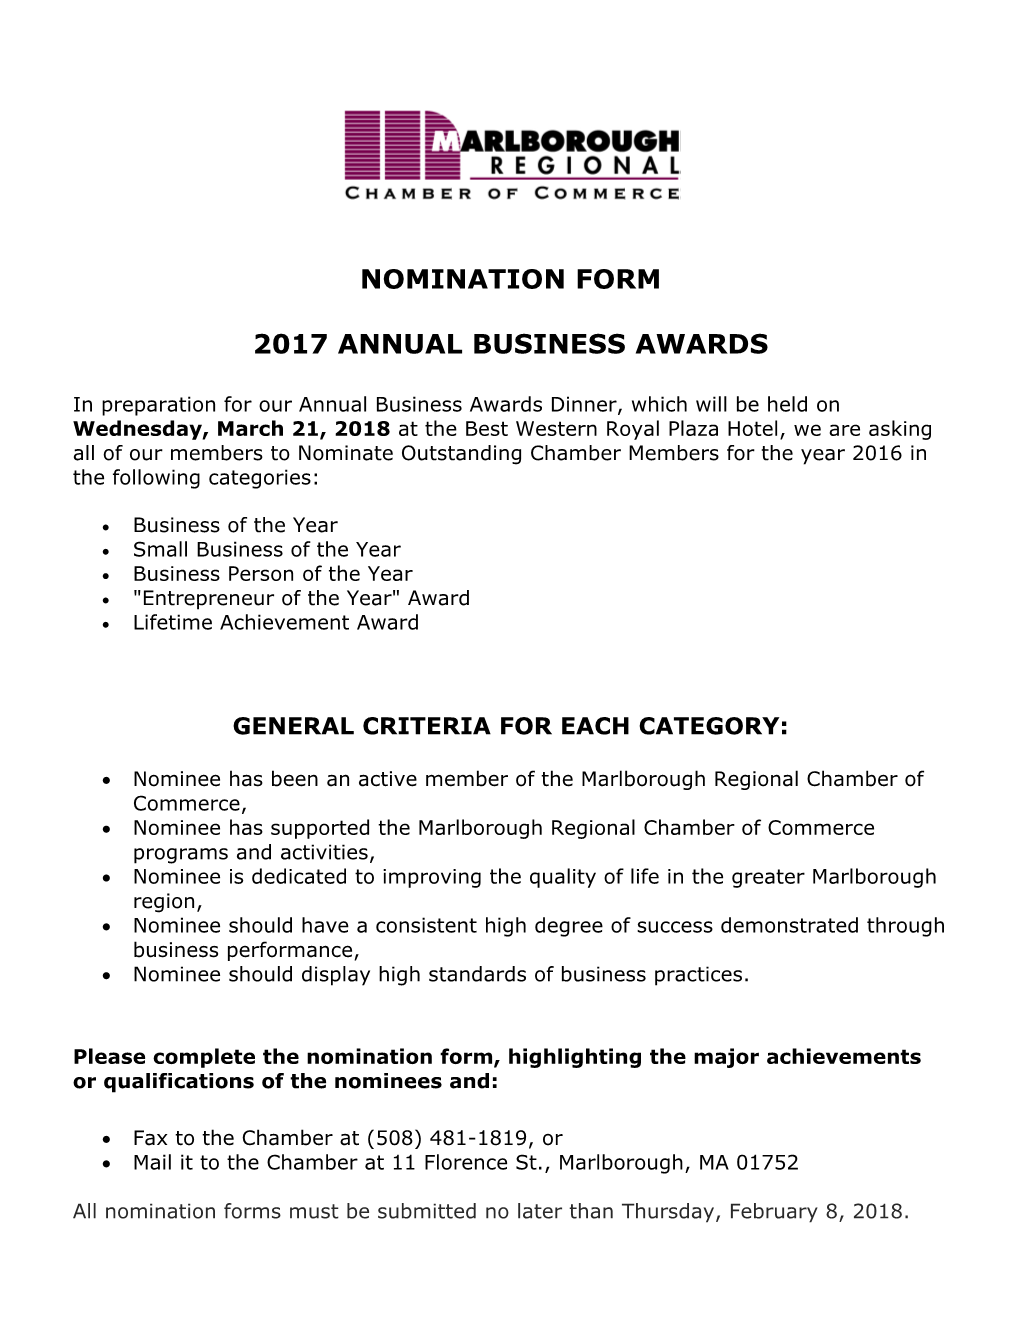 2017 Annual Business Awards